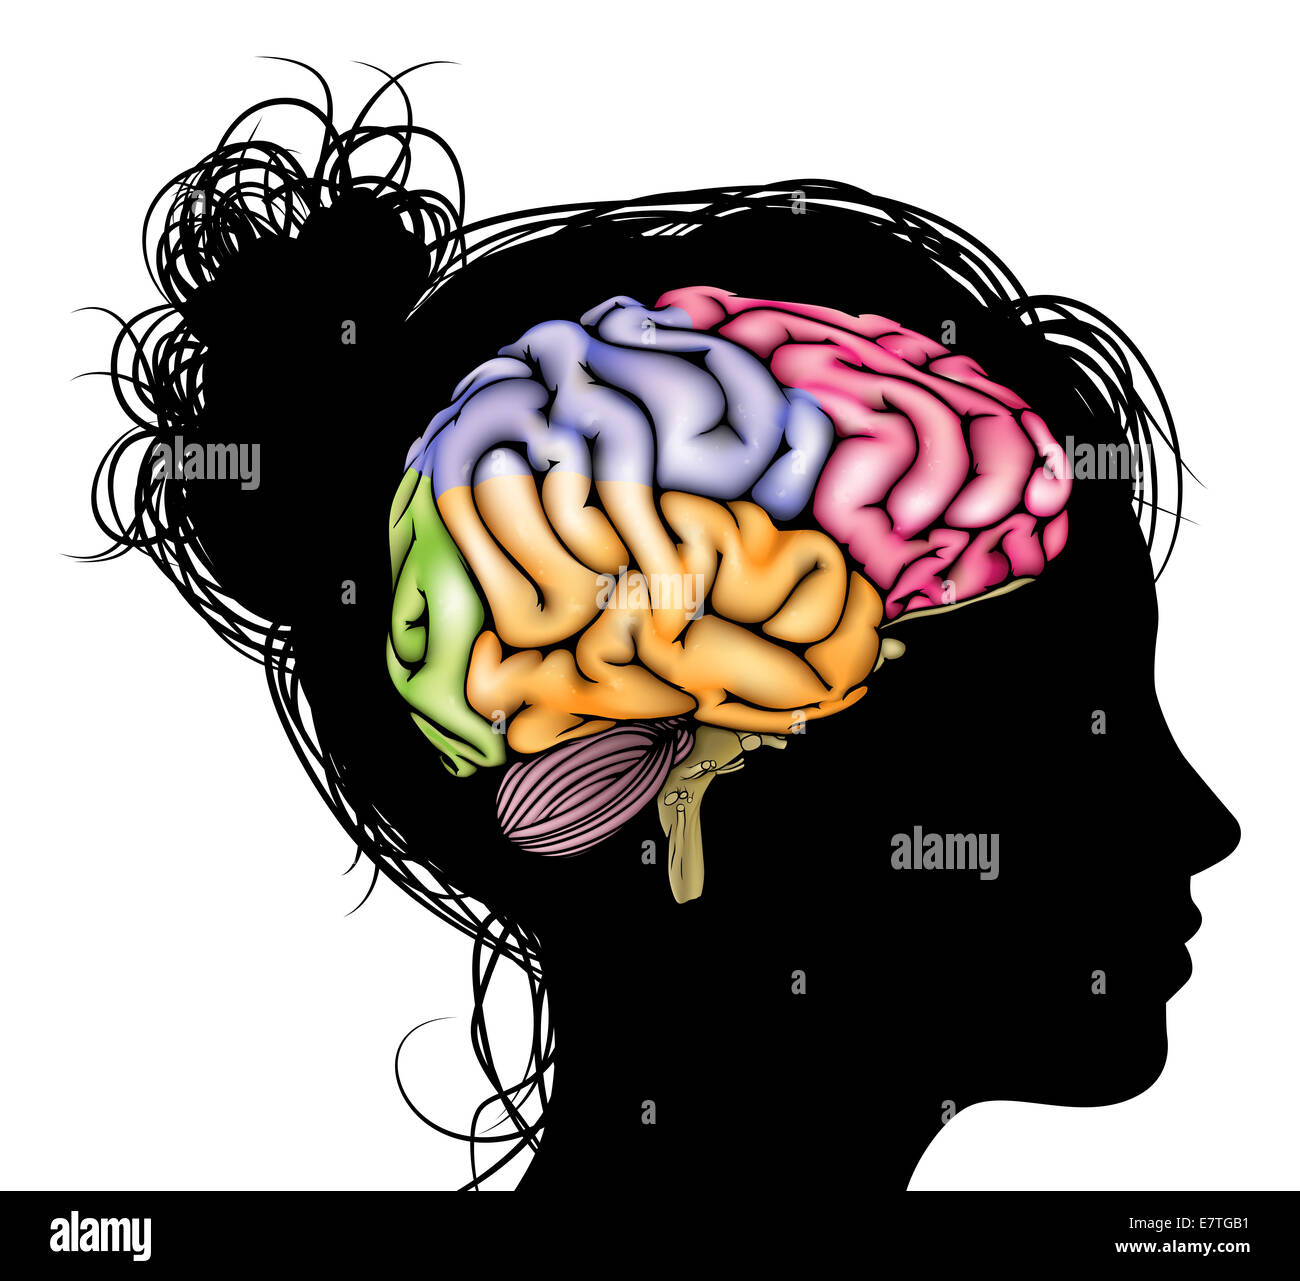 A womans head in silhouette with a sectioned brain. Concept for mental, psychological, brain development, learning and education Stock Photo